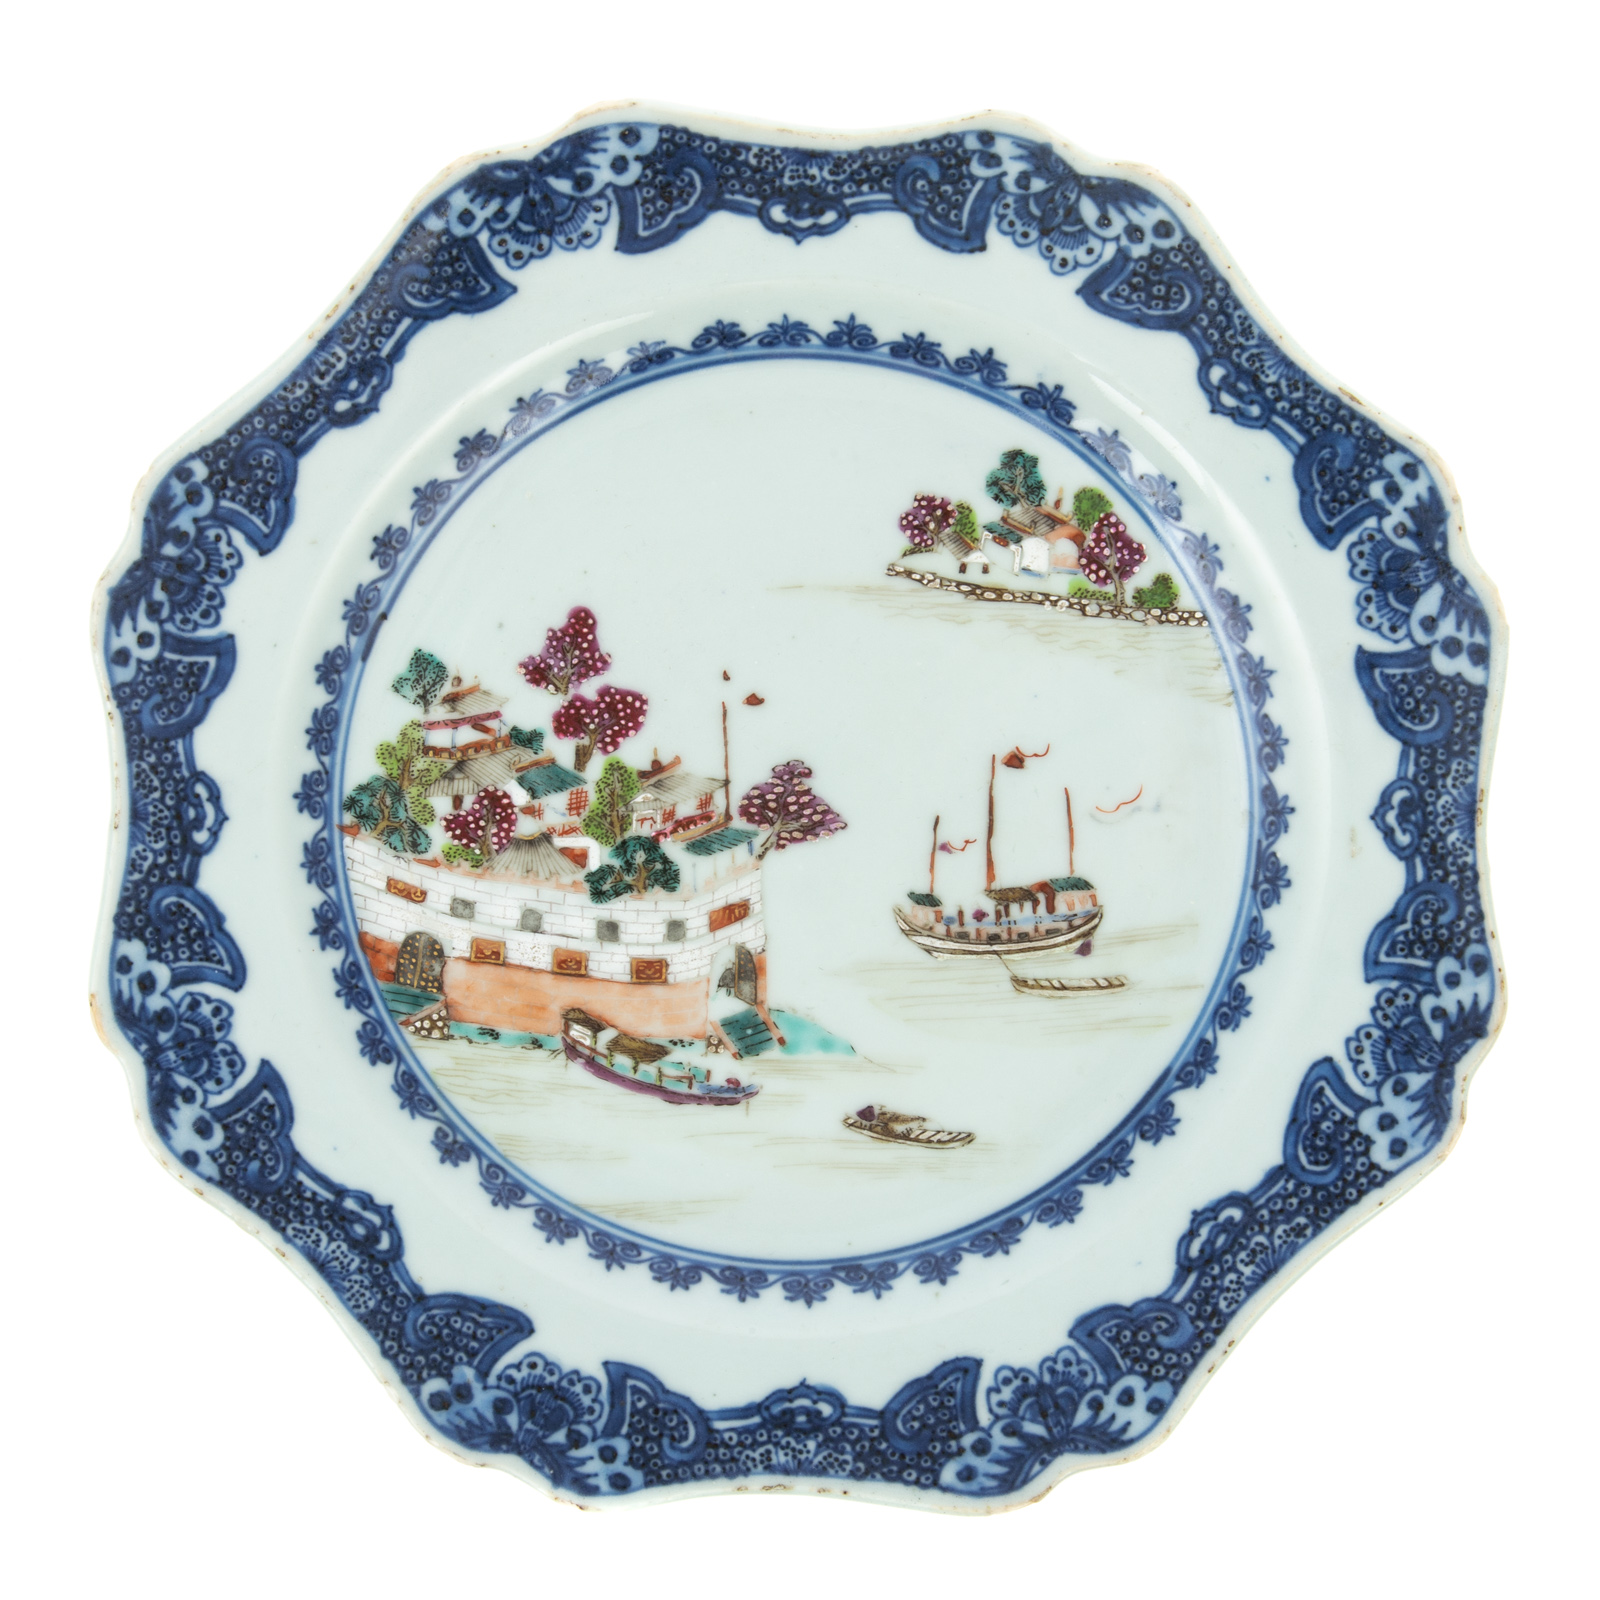 CHINESE EXPORT FORT FOLLY PLATE 2ea1a4